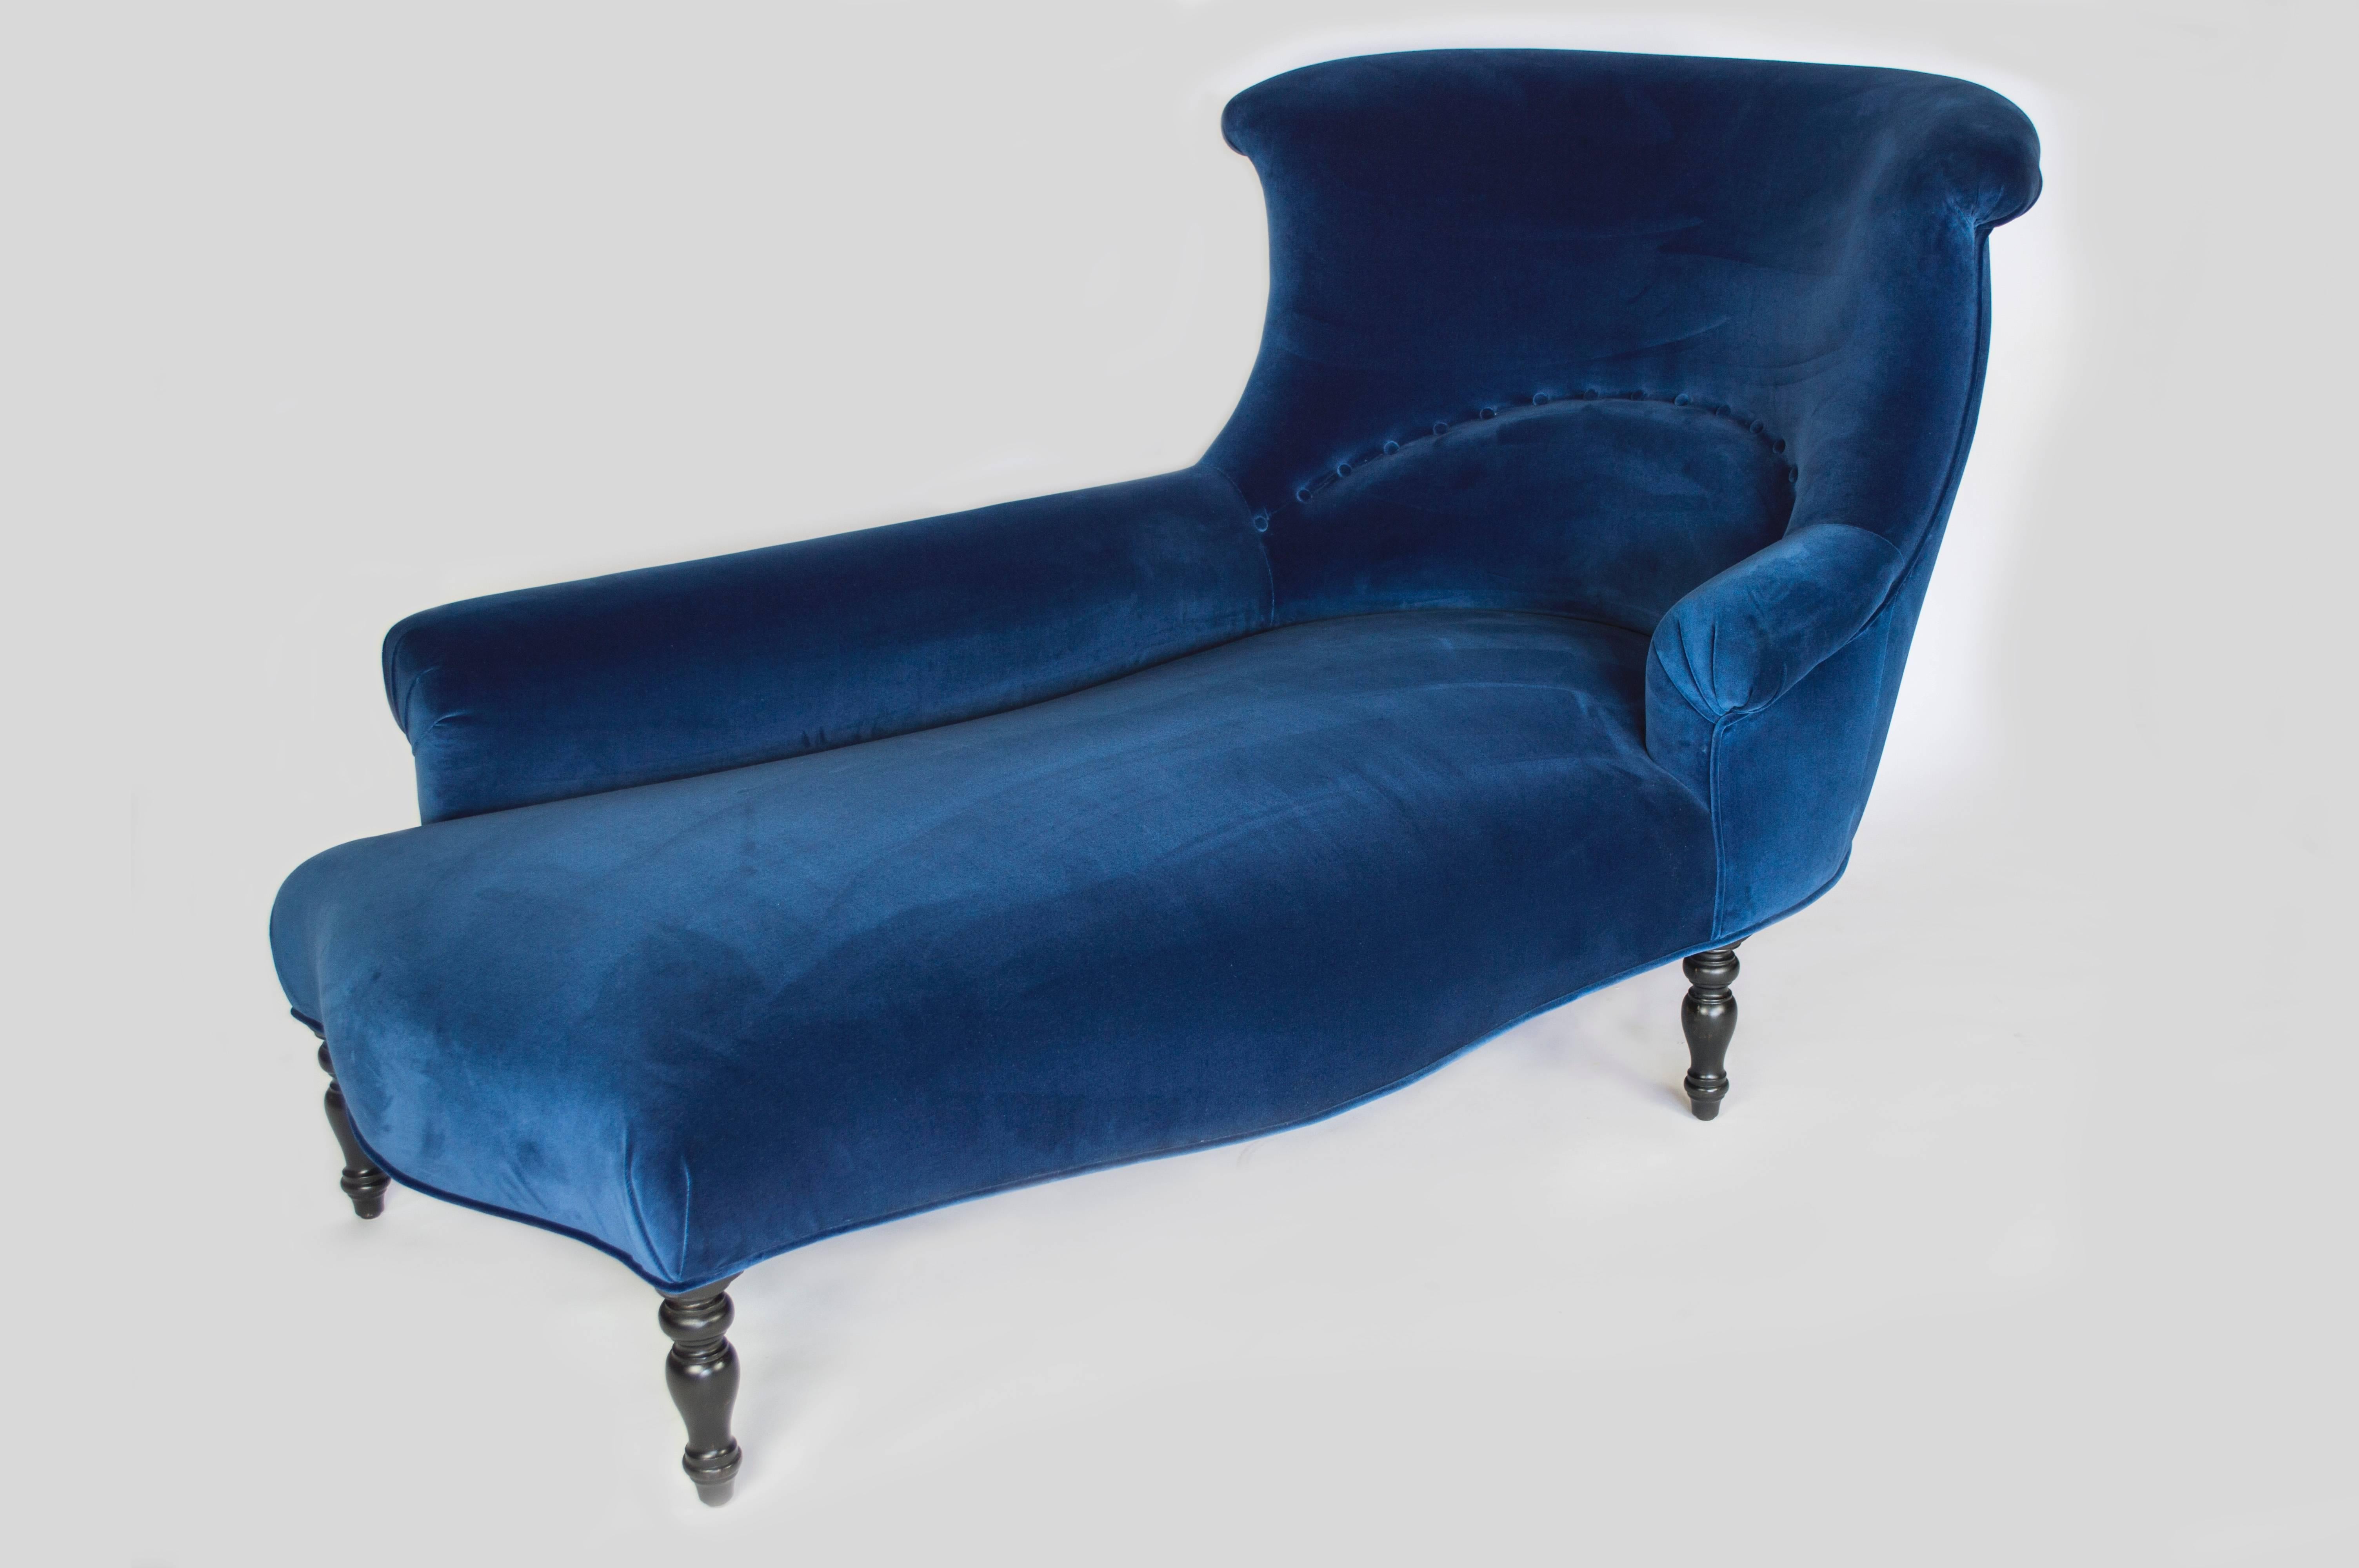 A Classic chaise longue with styling of the Napoleon III era. From every angle, you see its distinctive elegant curved lines. The chaise has been upholstered in a midnight blue velvet and the legs are stained ebony. Chaise longue is in our showroom